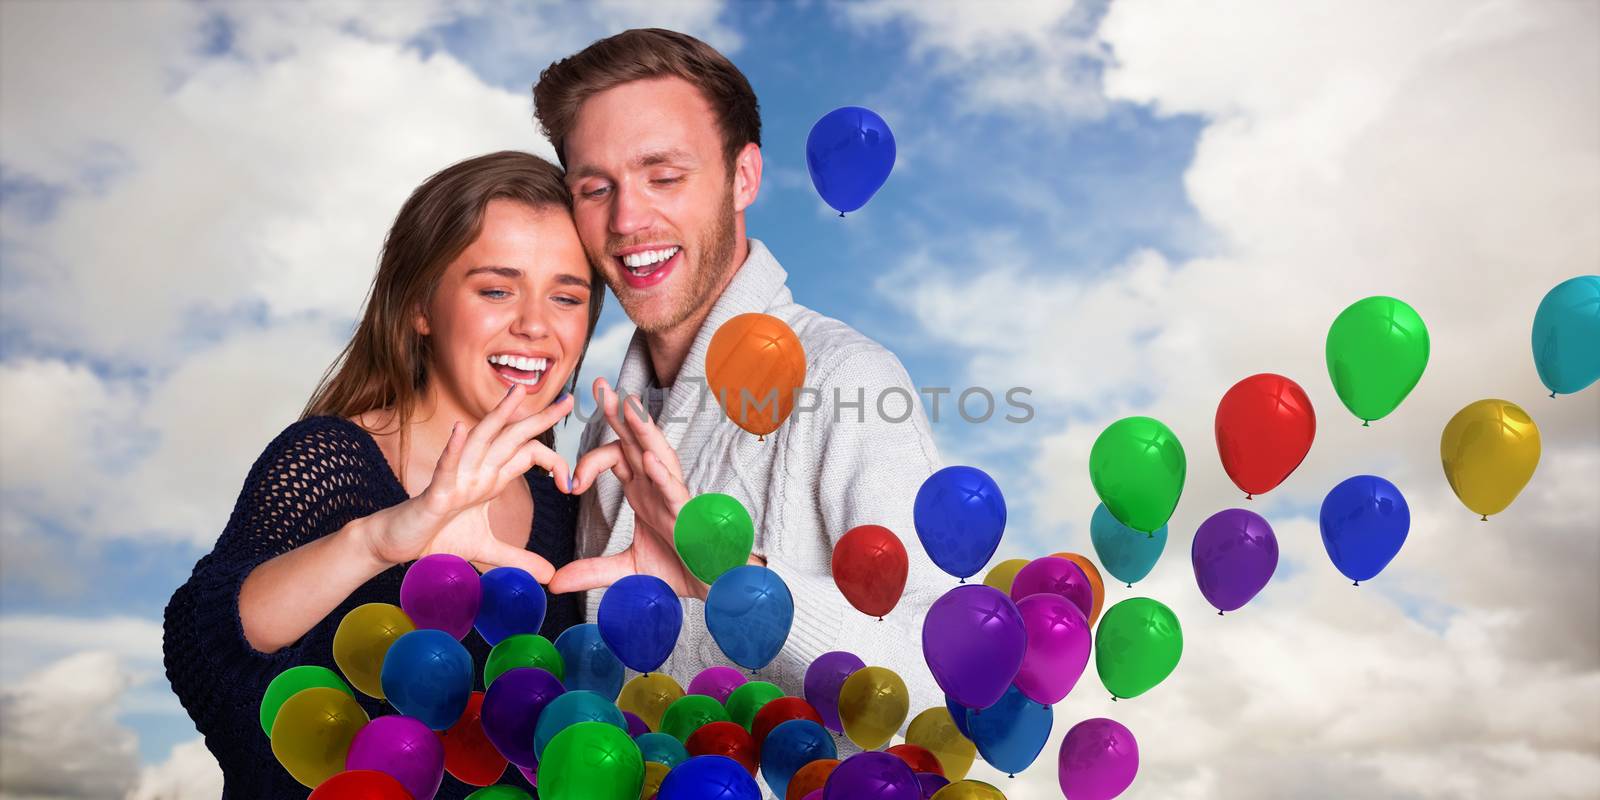 Happy couple forming heart with hands against blue sky with white clouds